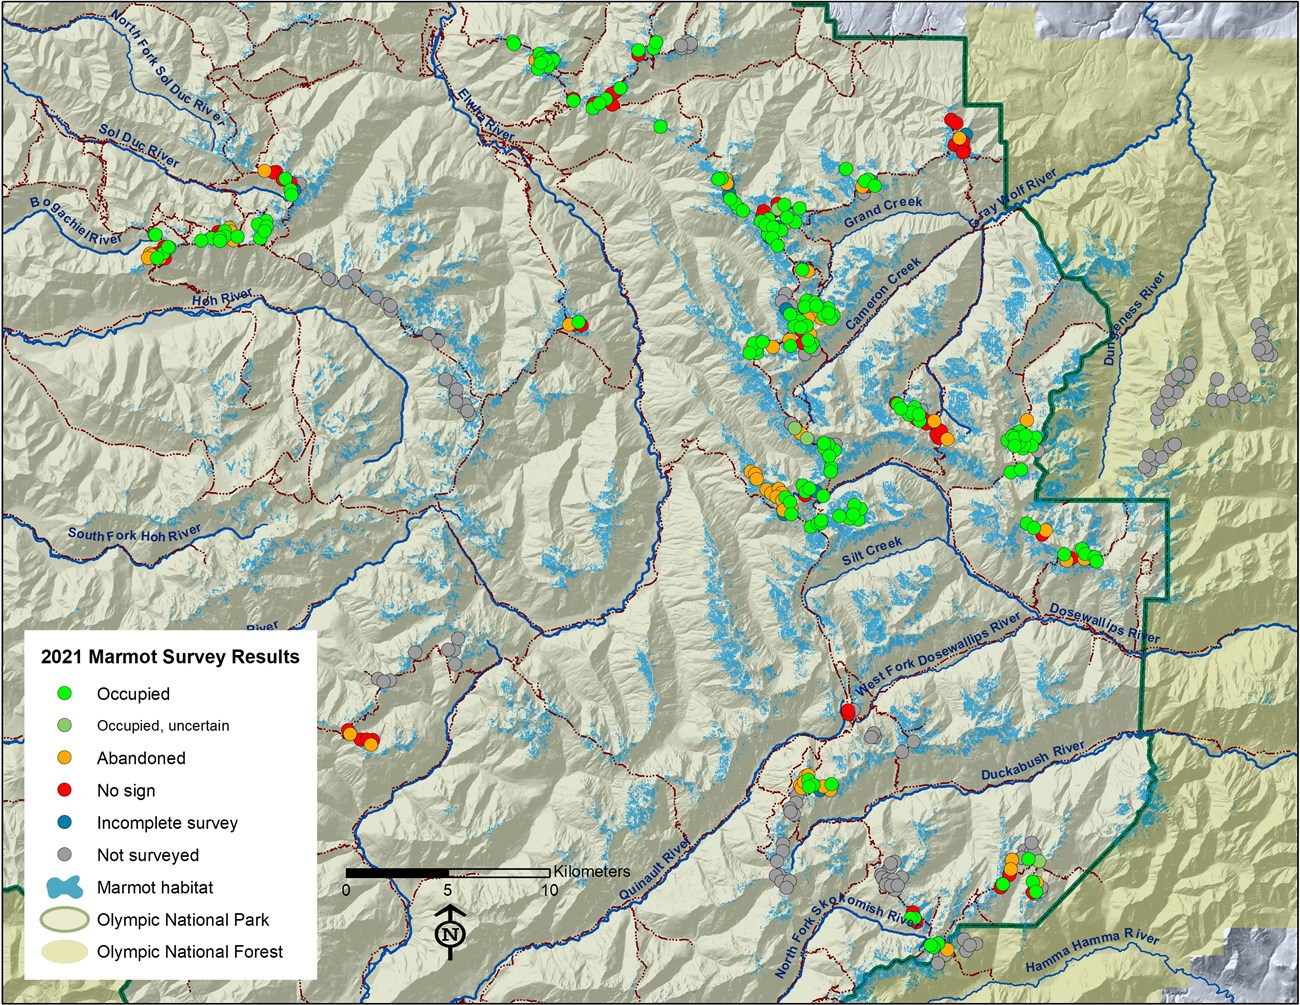 Map showing 2021 marmot survey site locations and results